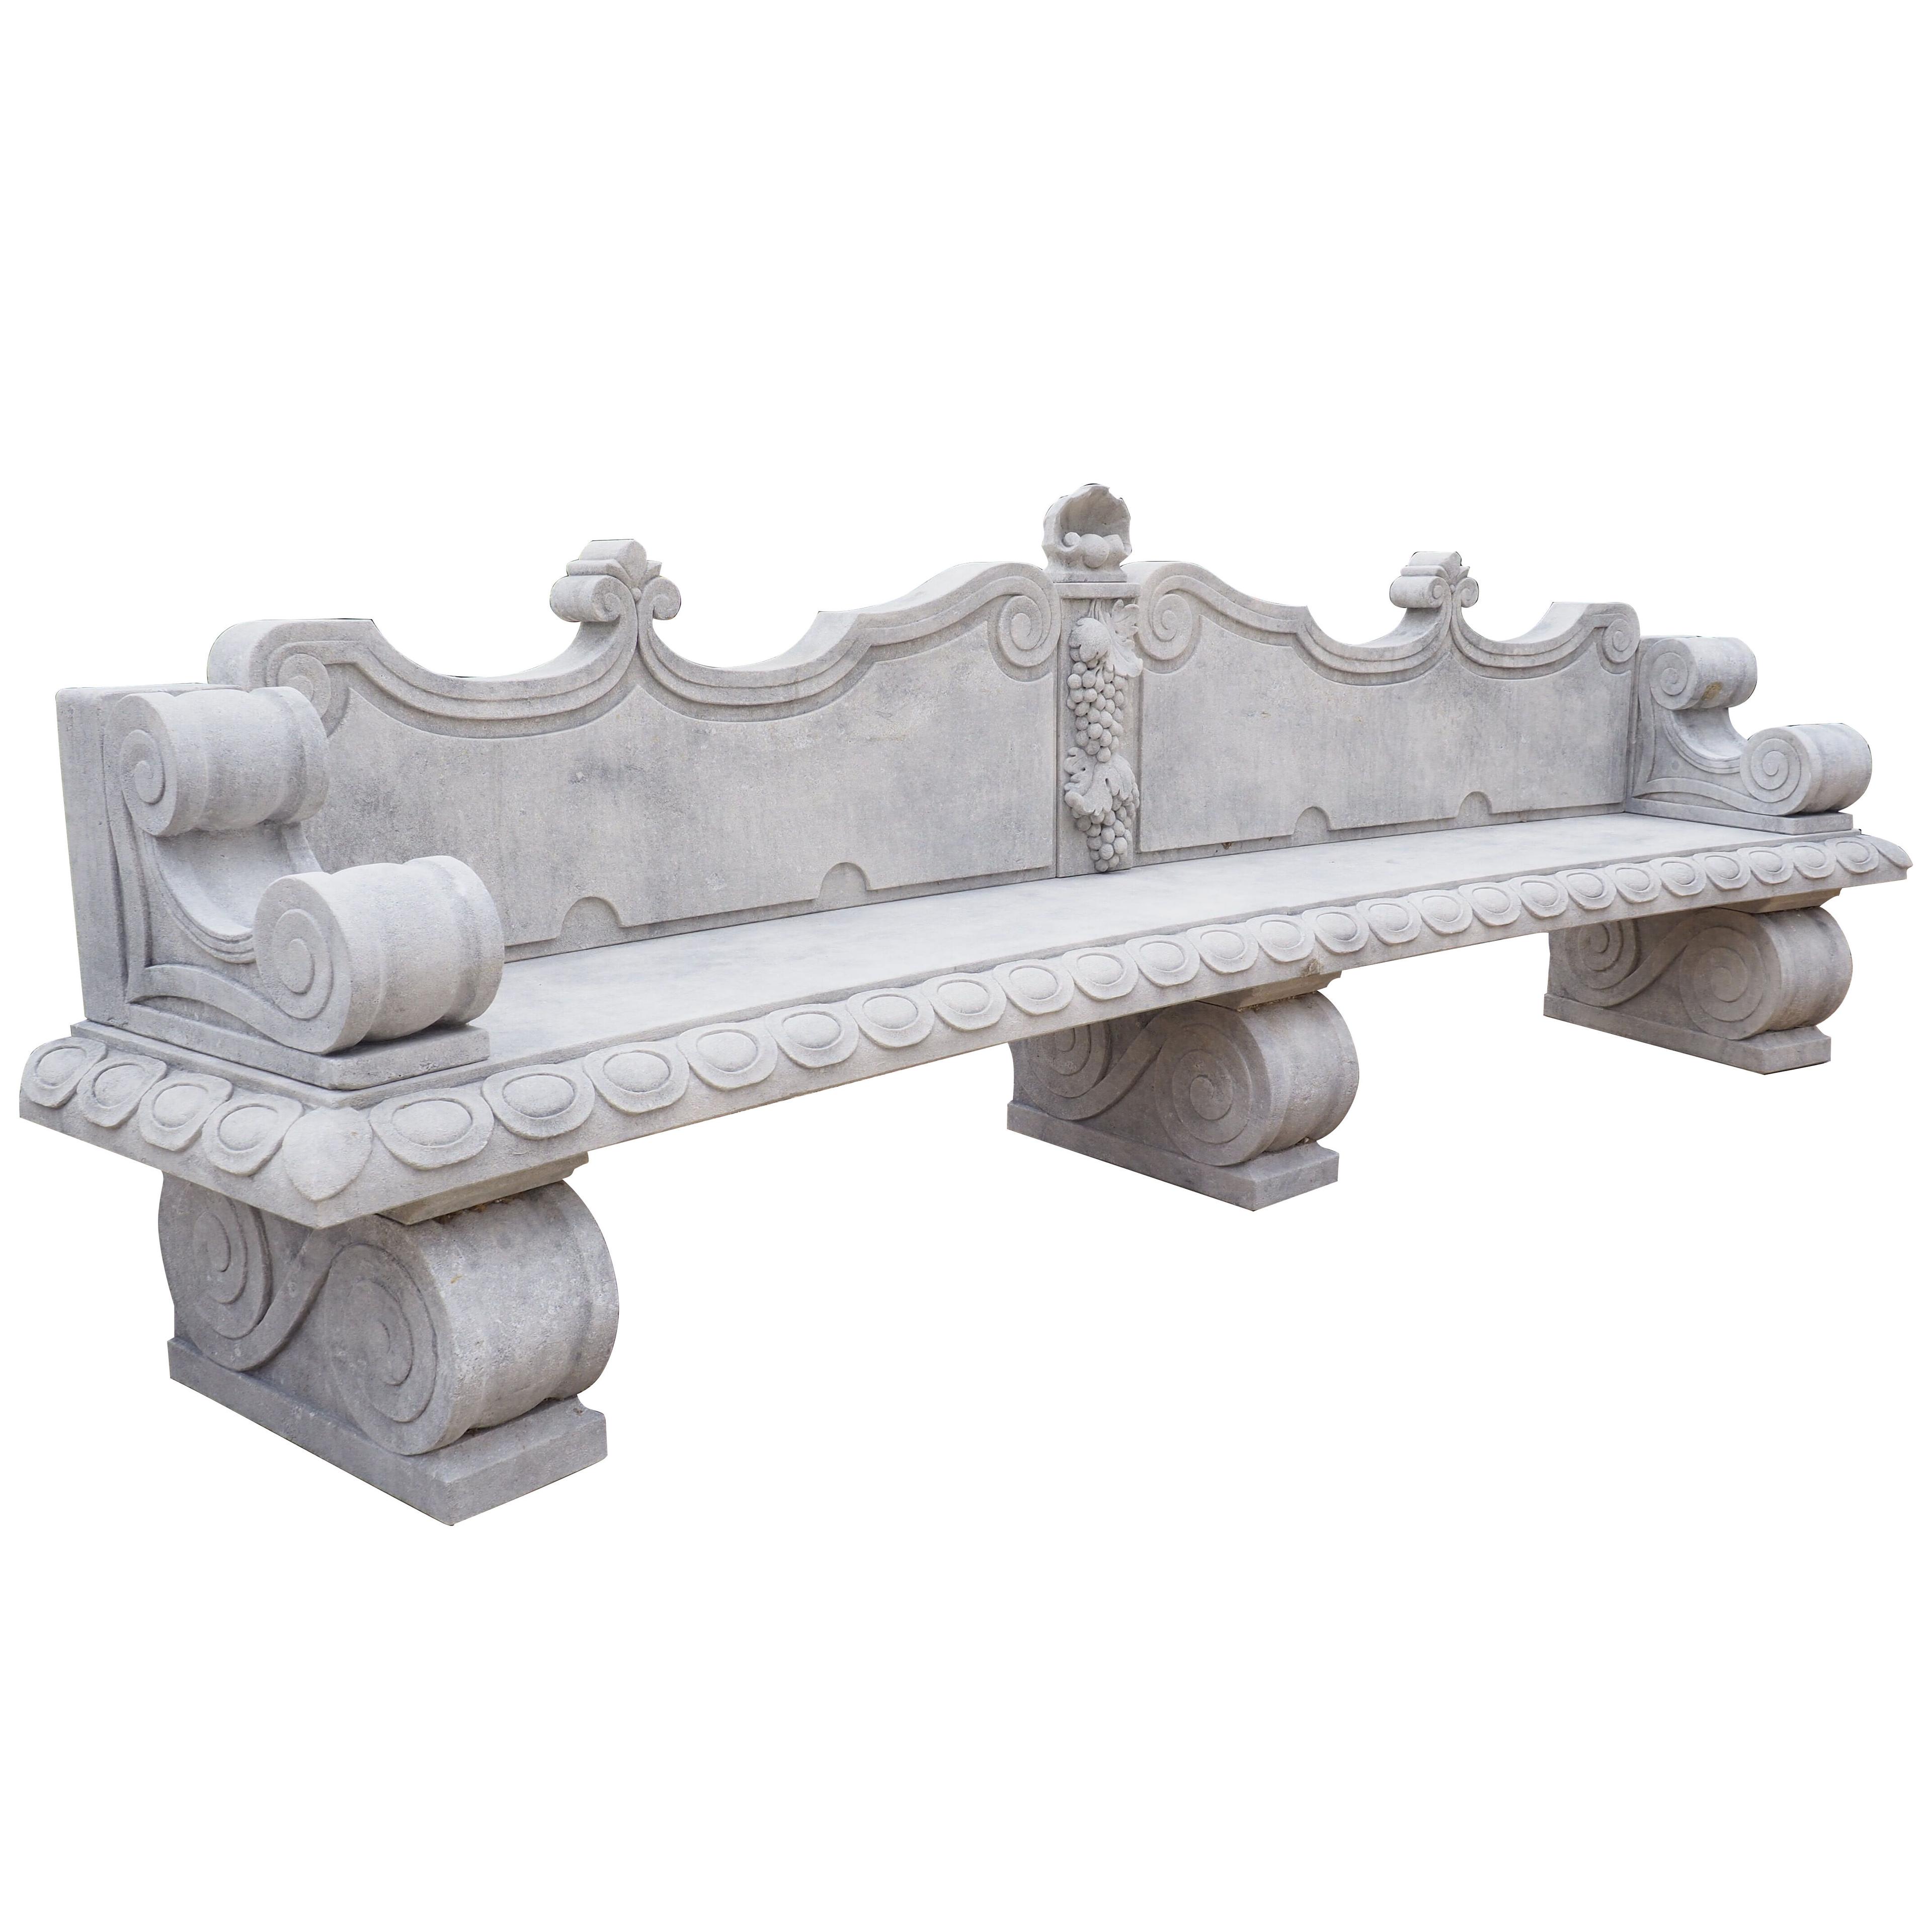 Beautifully Carved Limestone Bench with Fleur De Lys, Scrolls and Grape Clusters